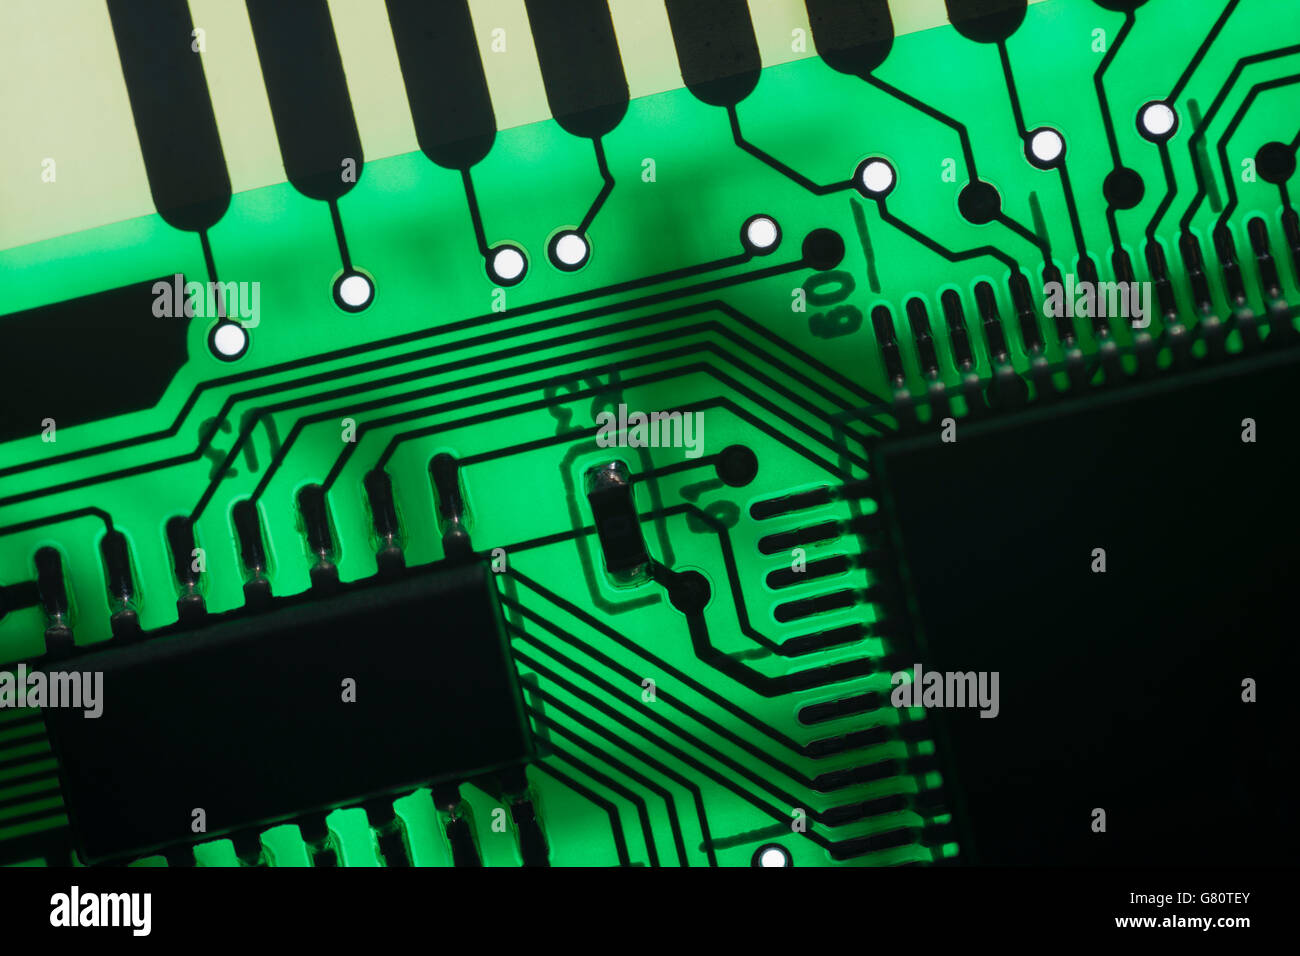 Computer technology concept. Circuit board / pcb showing components backlit with green light. Wiring inside computer, circuit close up, electronics Stock Photo